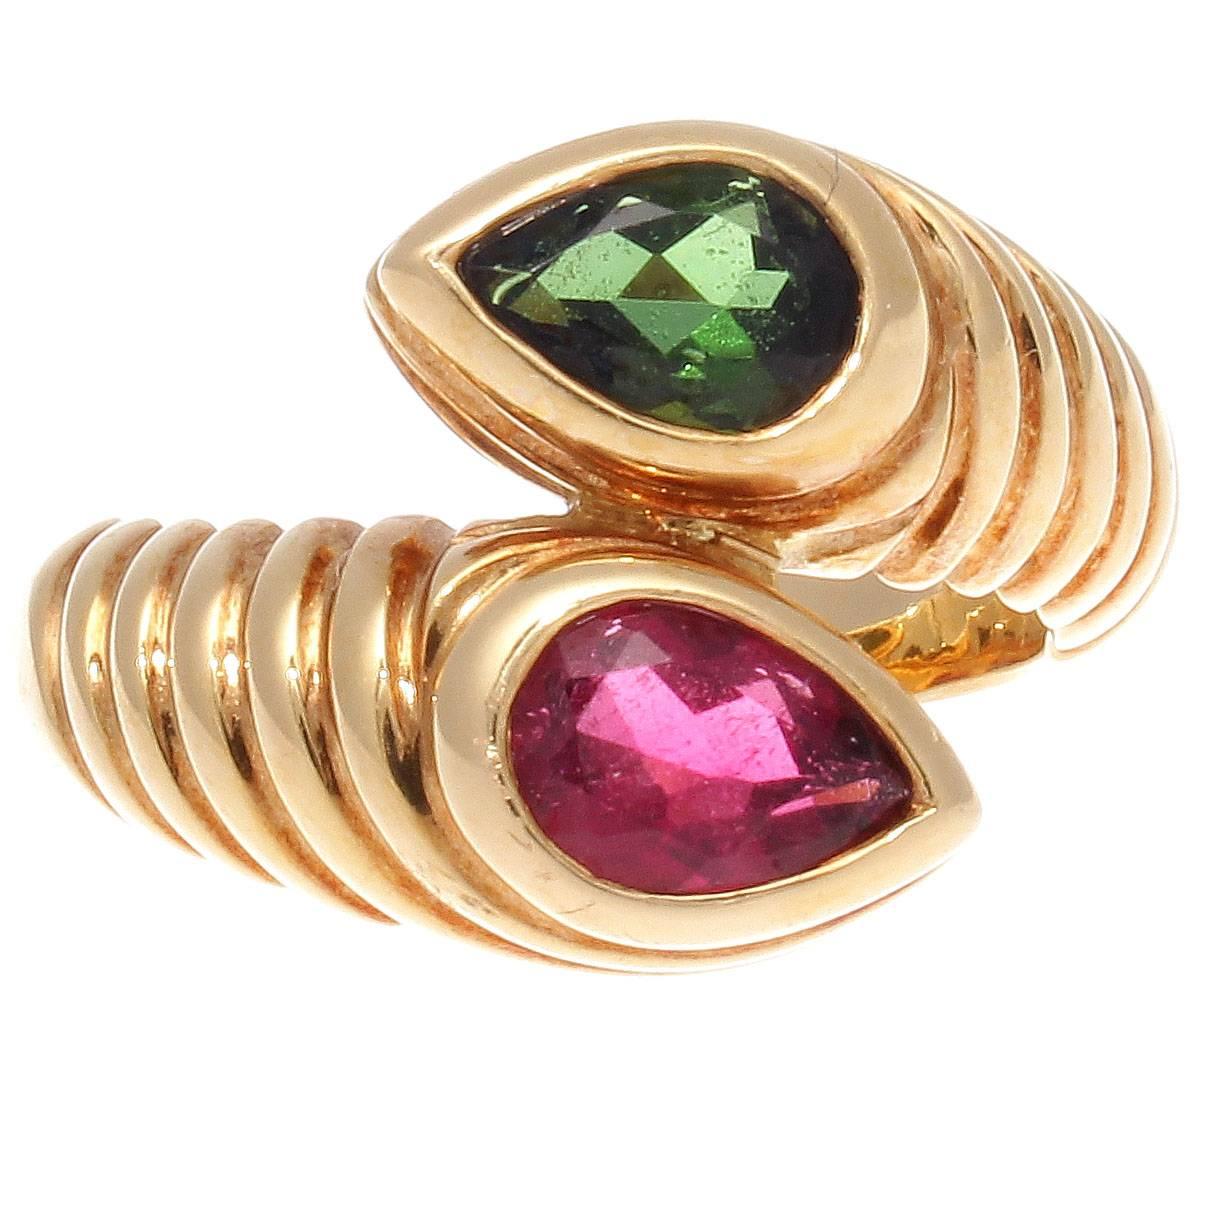 Celebrating opulence and color in the 1980's and 1990's Bulgari's designs were unforgettable and still remain popular today. Created with vibrant green tourmaline overlapping with the rich red tourmaline. Set amid rolling contours of 18k yellow